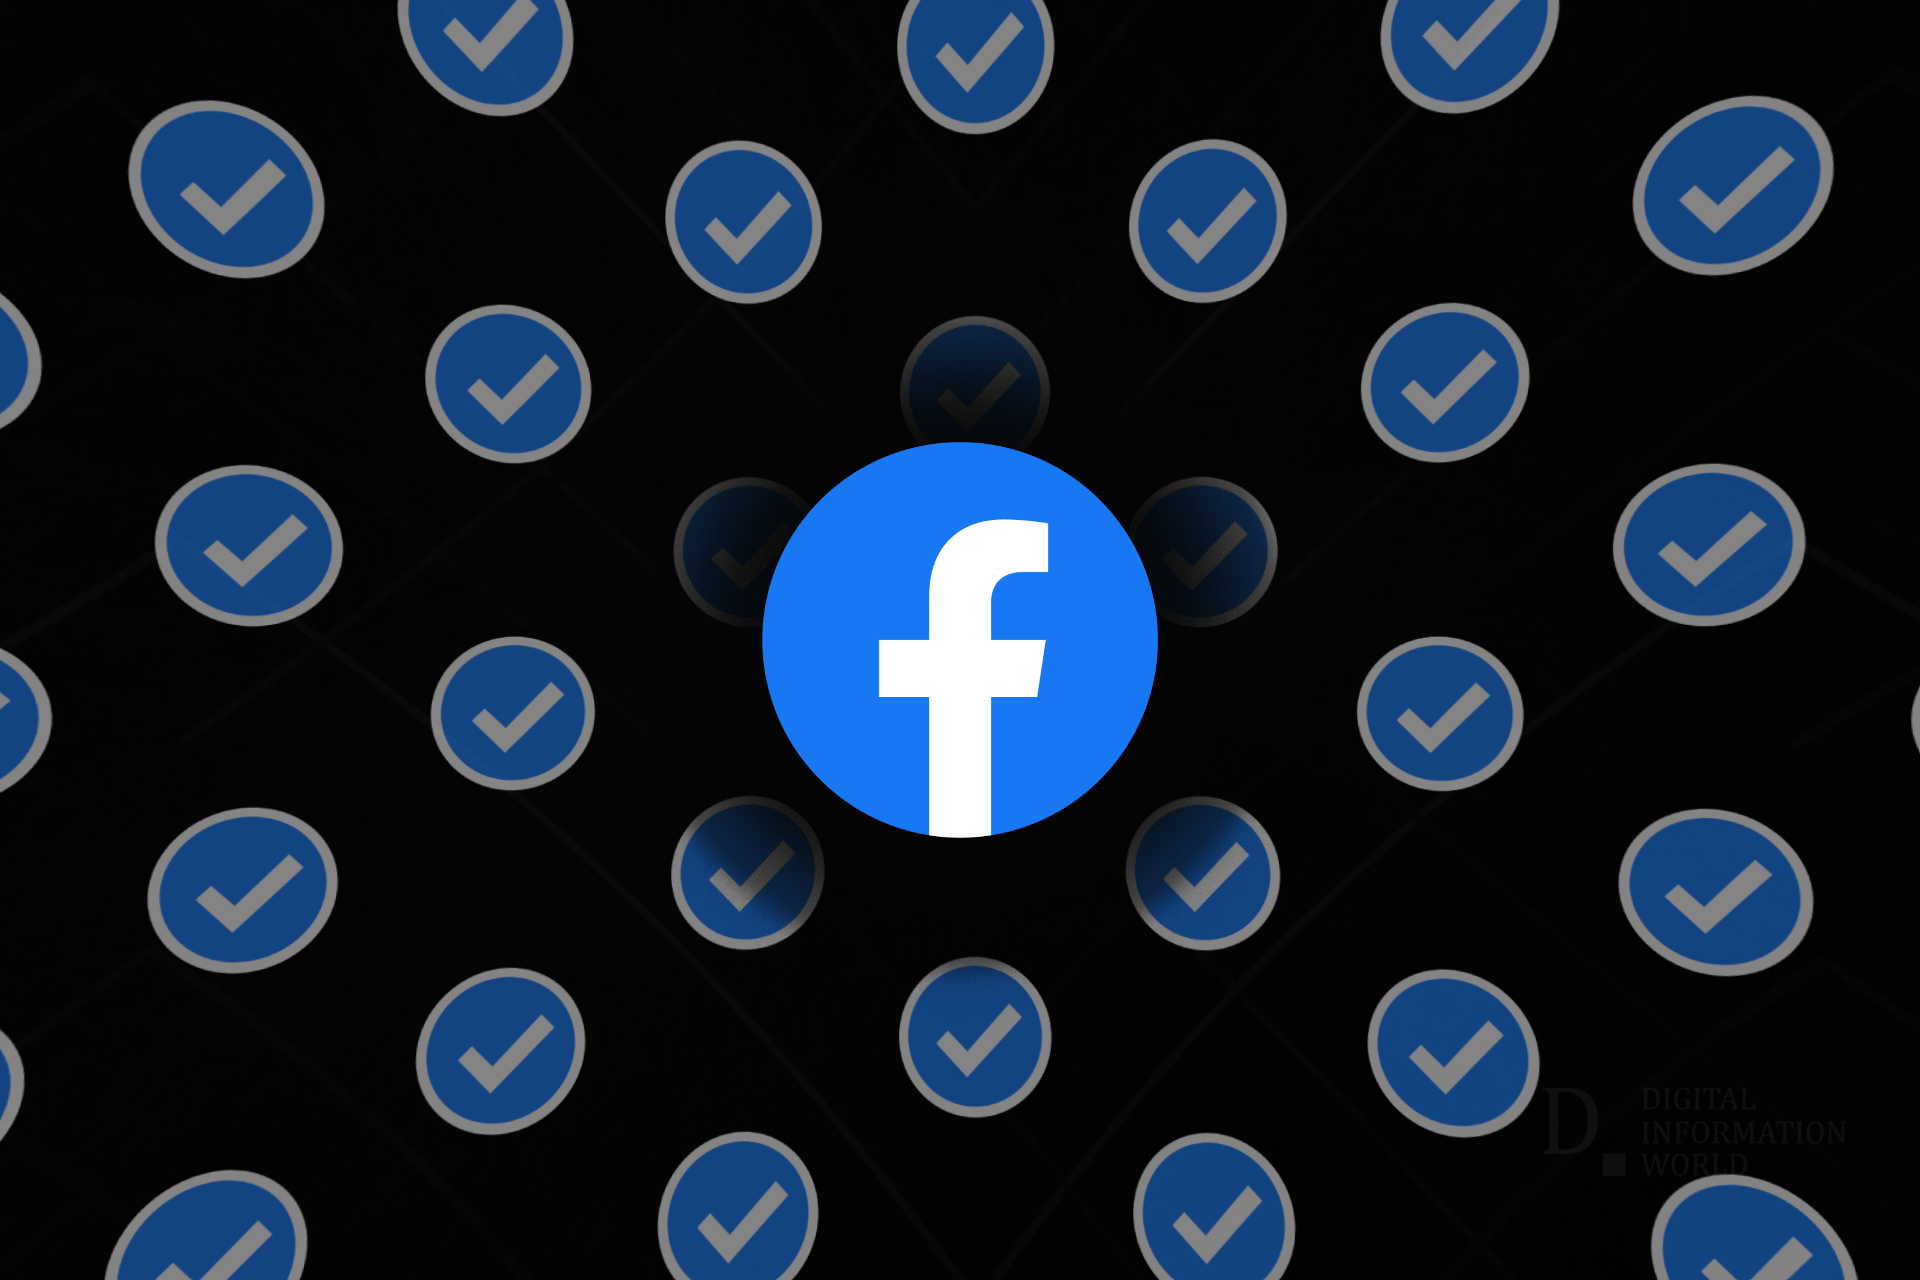 New Verification Guidelines For Facebook And Instagram Accounts